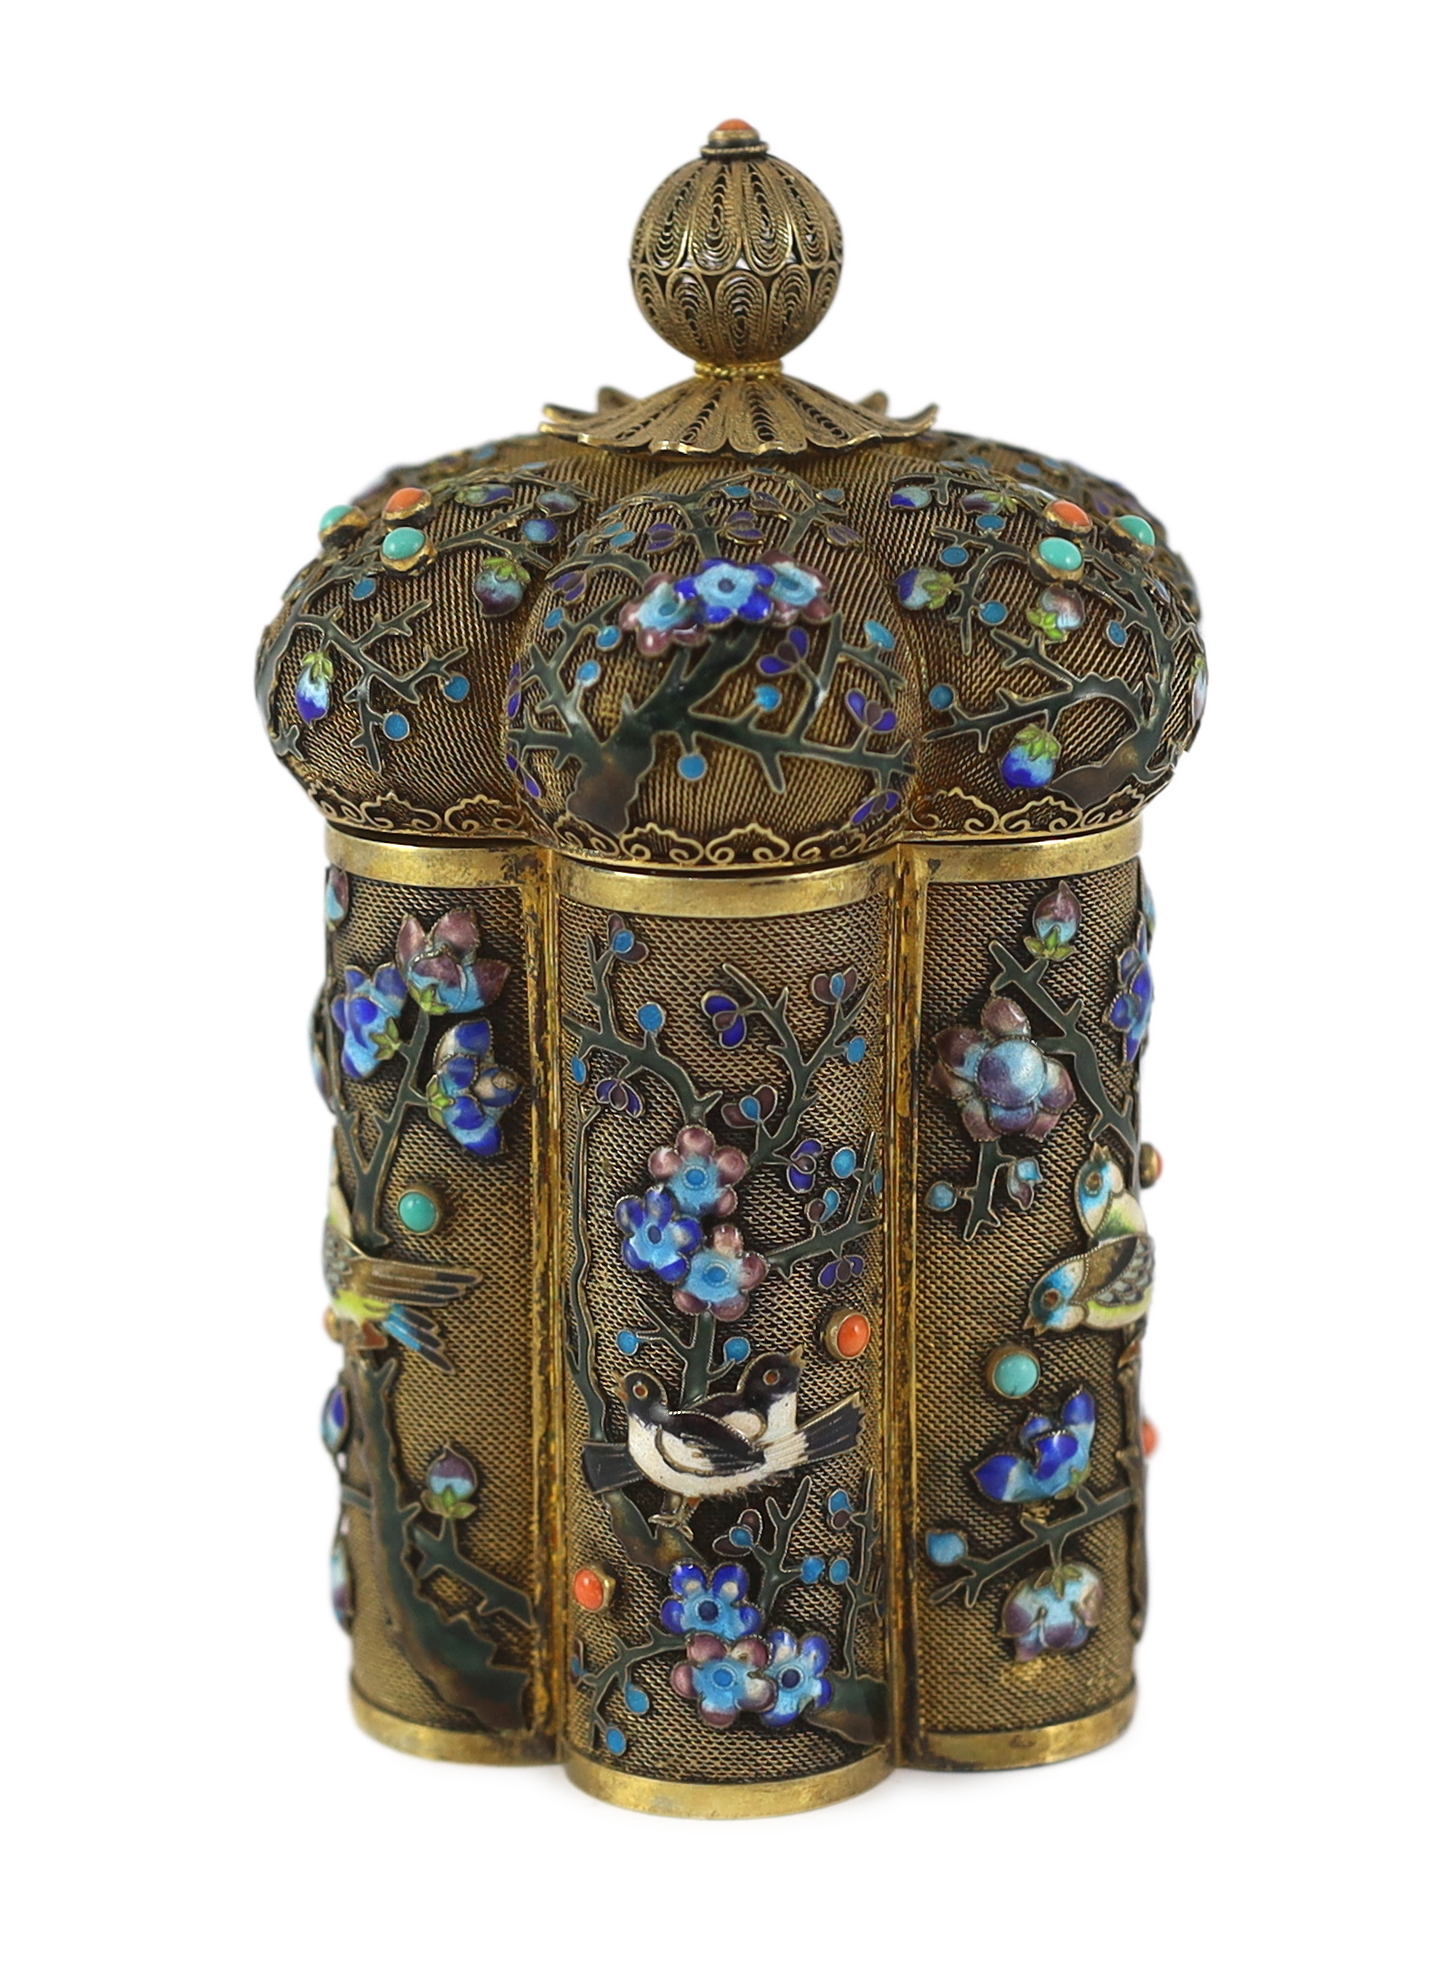 A Chinese silver gilt and enamel jar and cover, mid 20th century                                                                                                                                                            